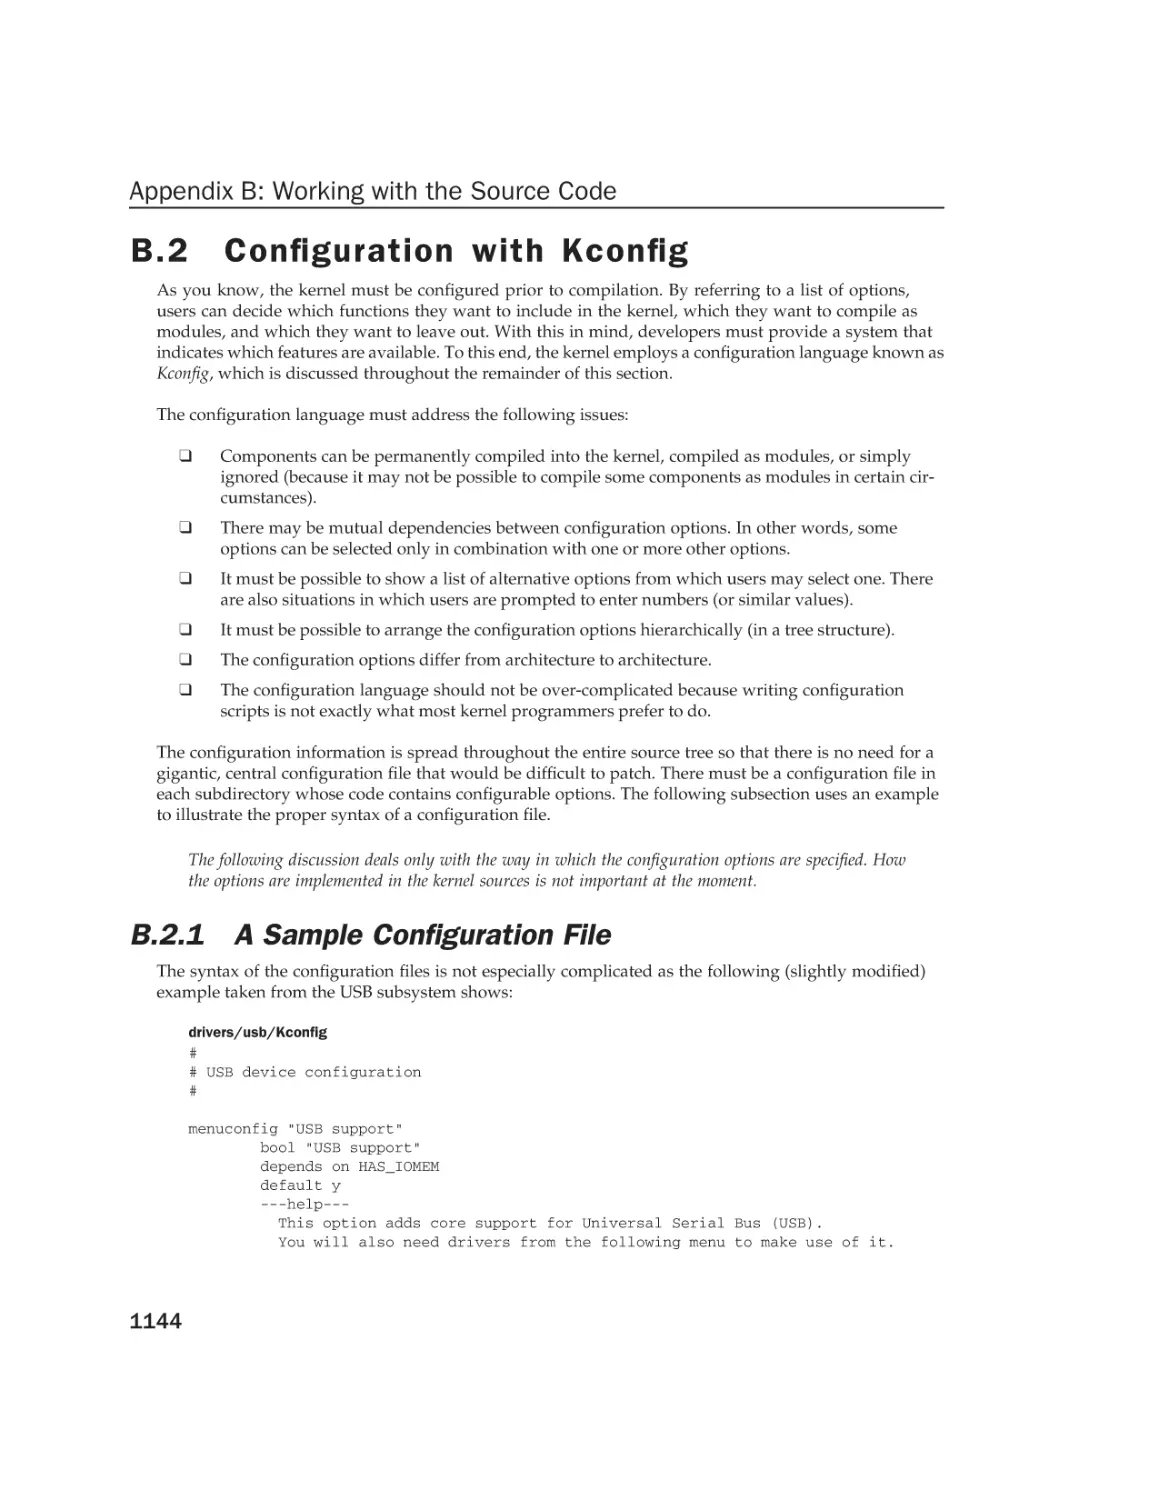 B.2 Configuration with Kconfig